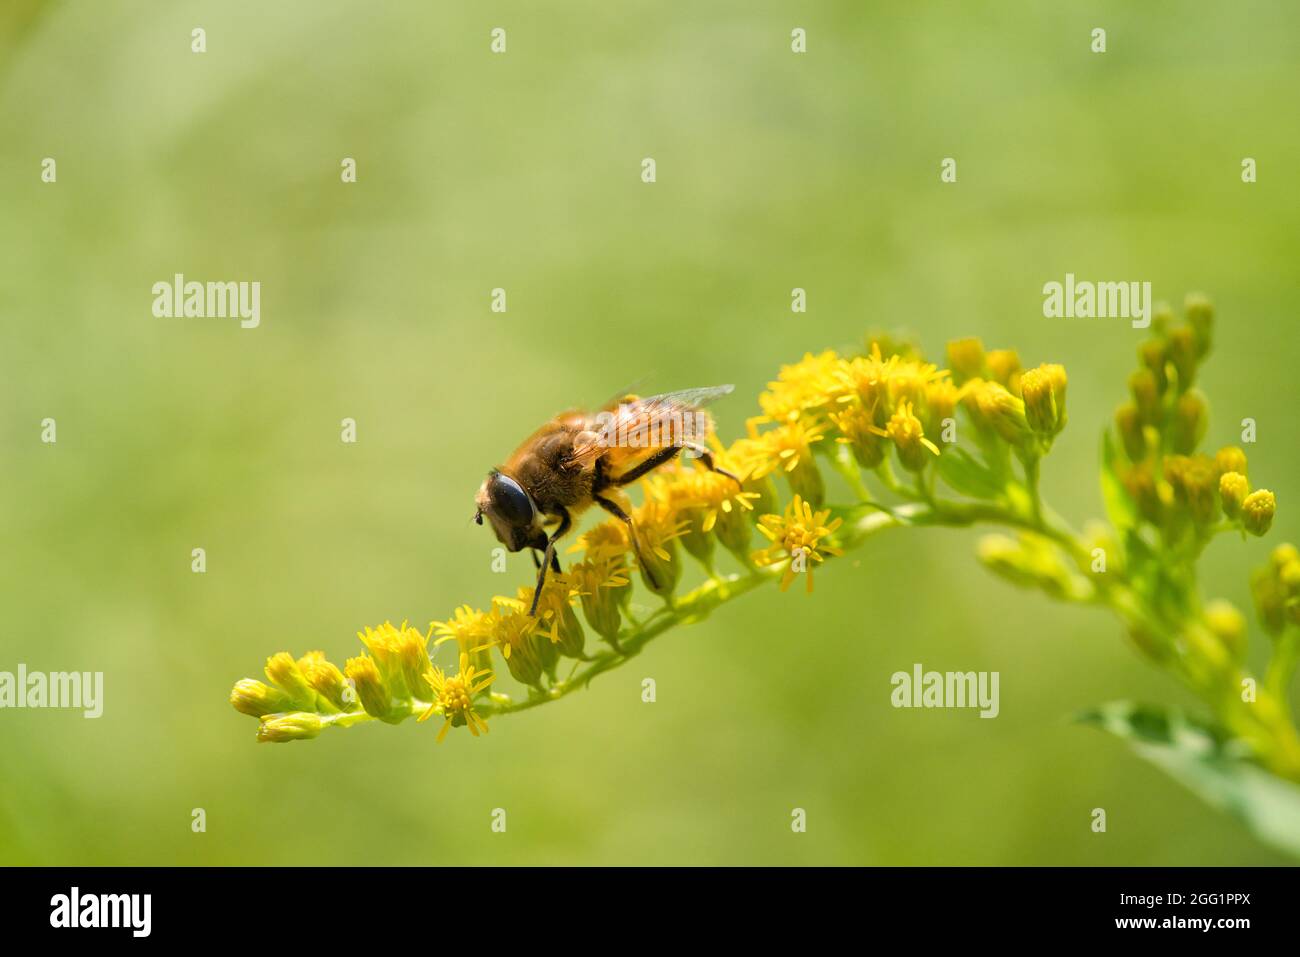 the close up in front of the common drone fly, Eristalis tenax, resting on a small yellow flower Stock Photo